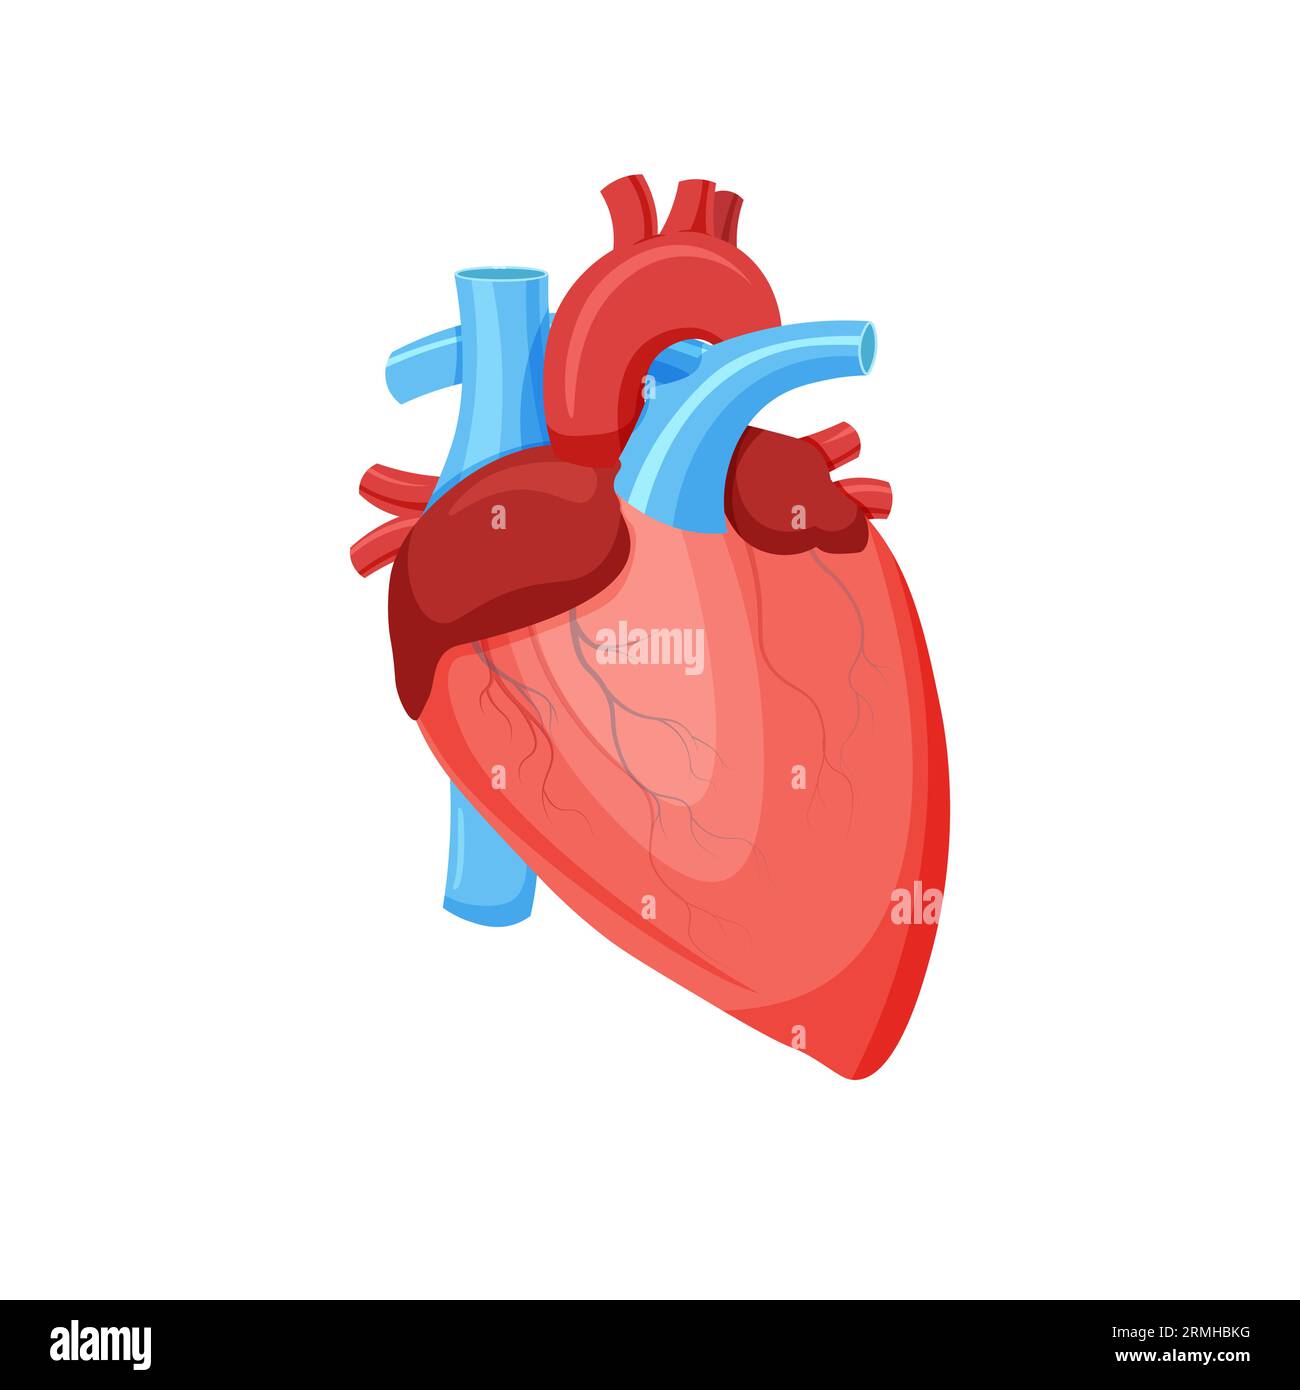 Human Heart strength as an open cardiovascular organ with a punch as a  medical symbol for fighting cardiology related disease Stock Photo - Alamy